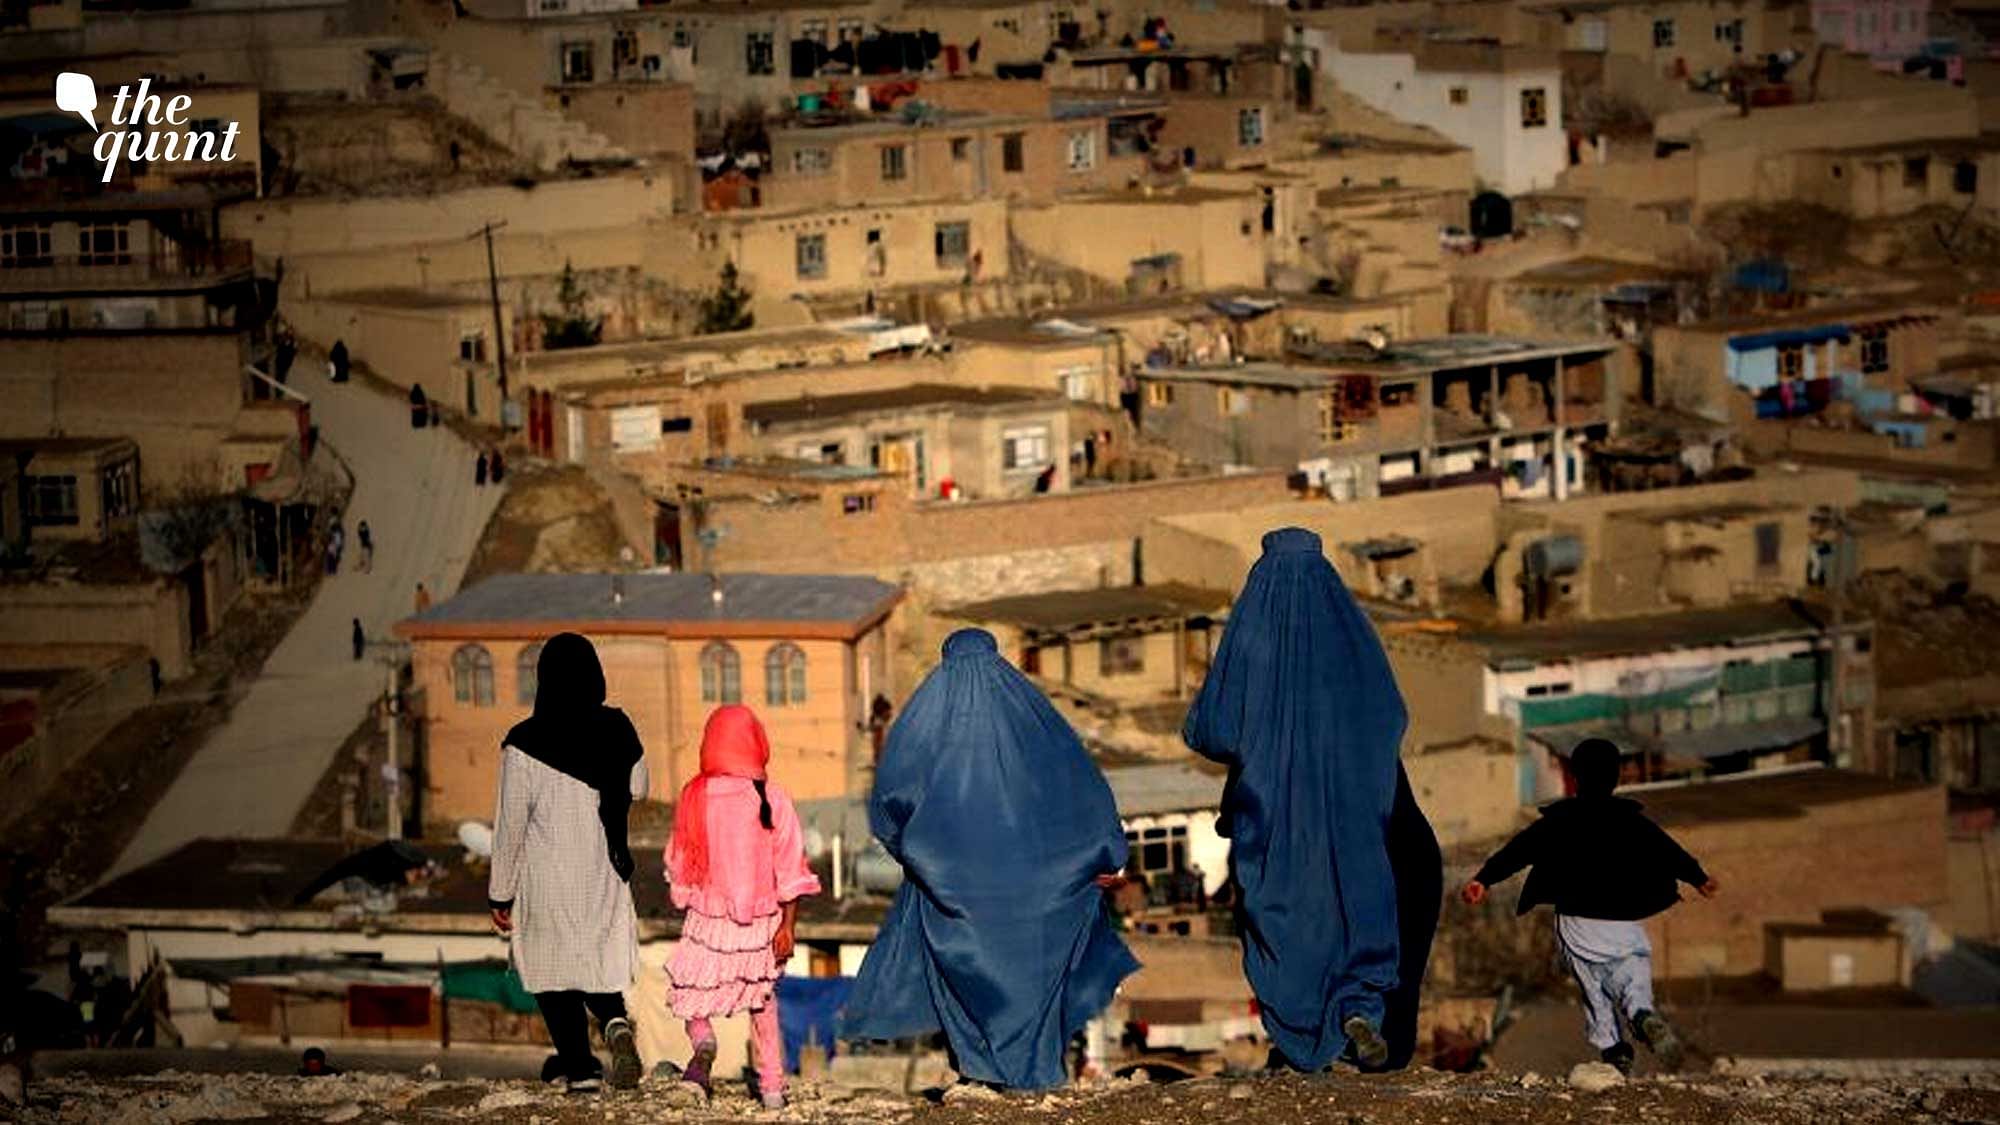 <div class="paragraphs"><p>Hardline Islamist group Taliban had seized power in Afghanistan on 15 August, giving rise to fears of severe restrictions being <a href="https://www.thequint.com/neon/gender/afghanistan-women-help-forced-marriage-schools-shut#read-more">imposed on women</a>.</p></div>